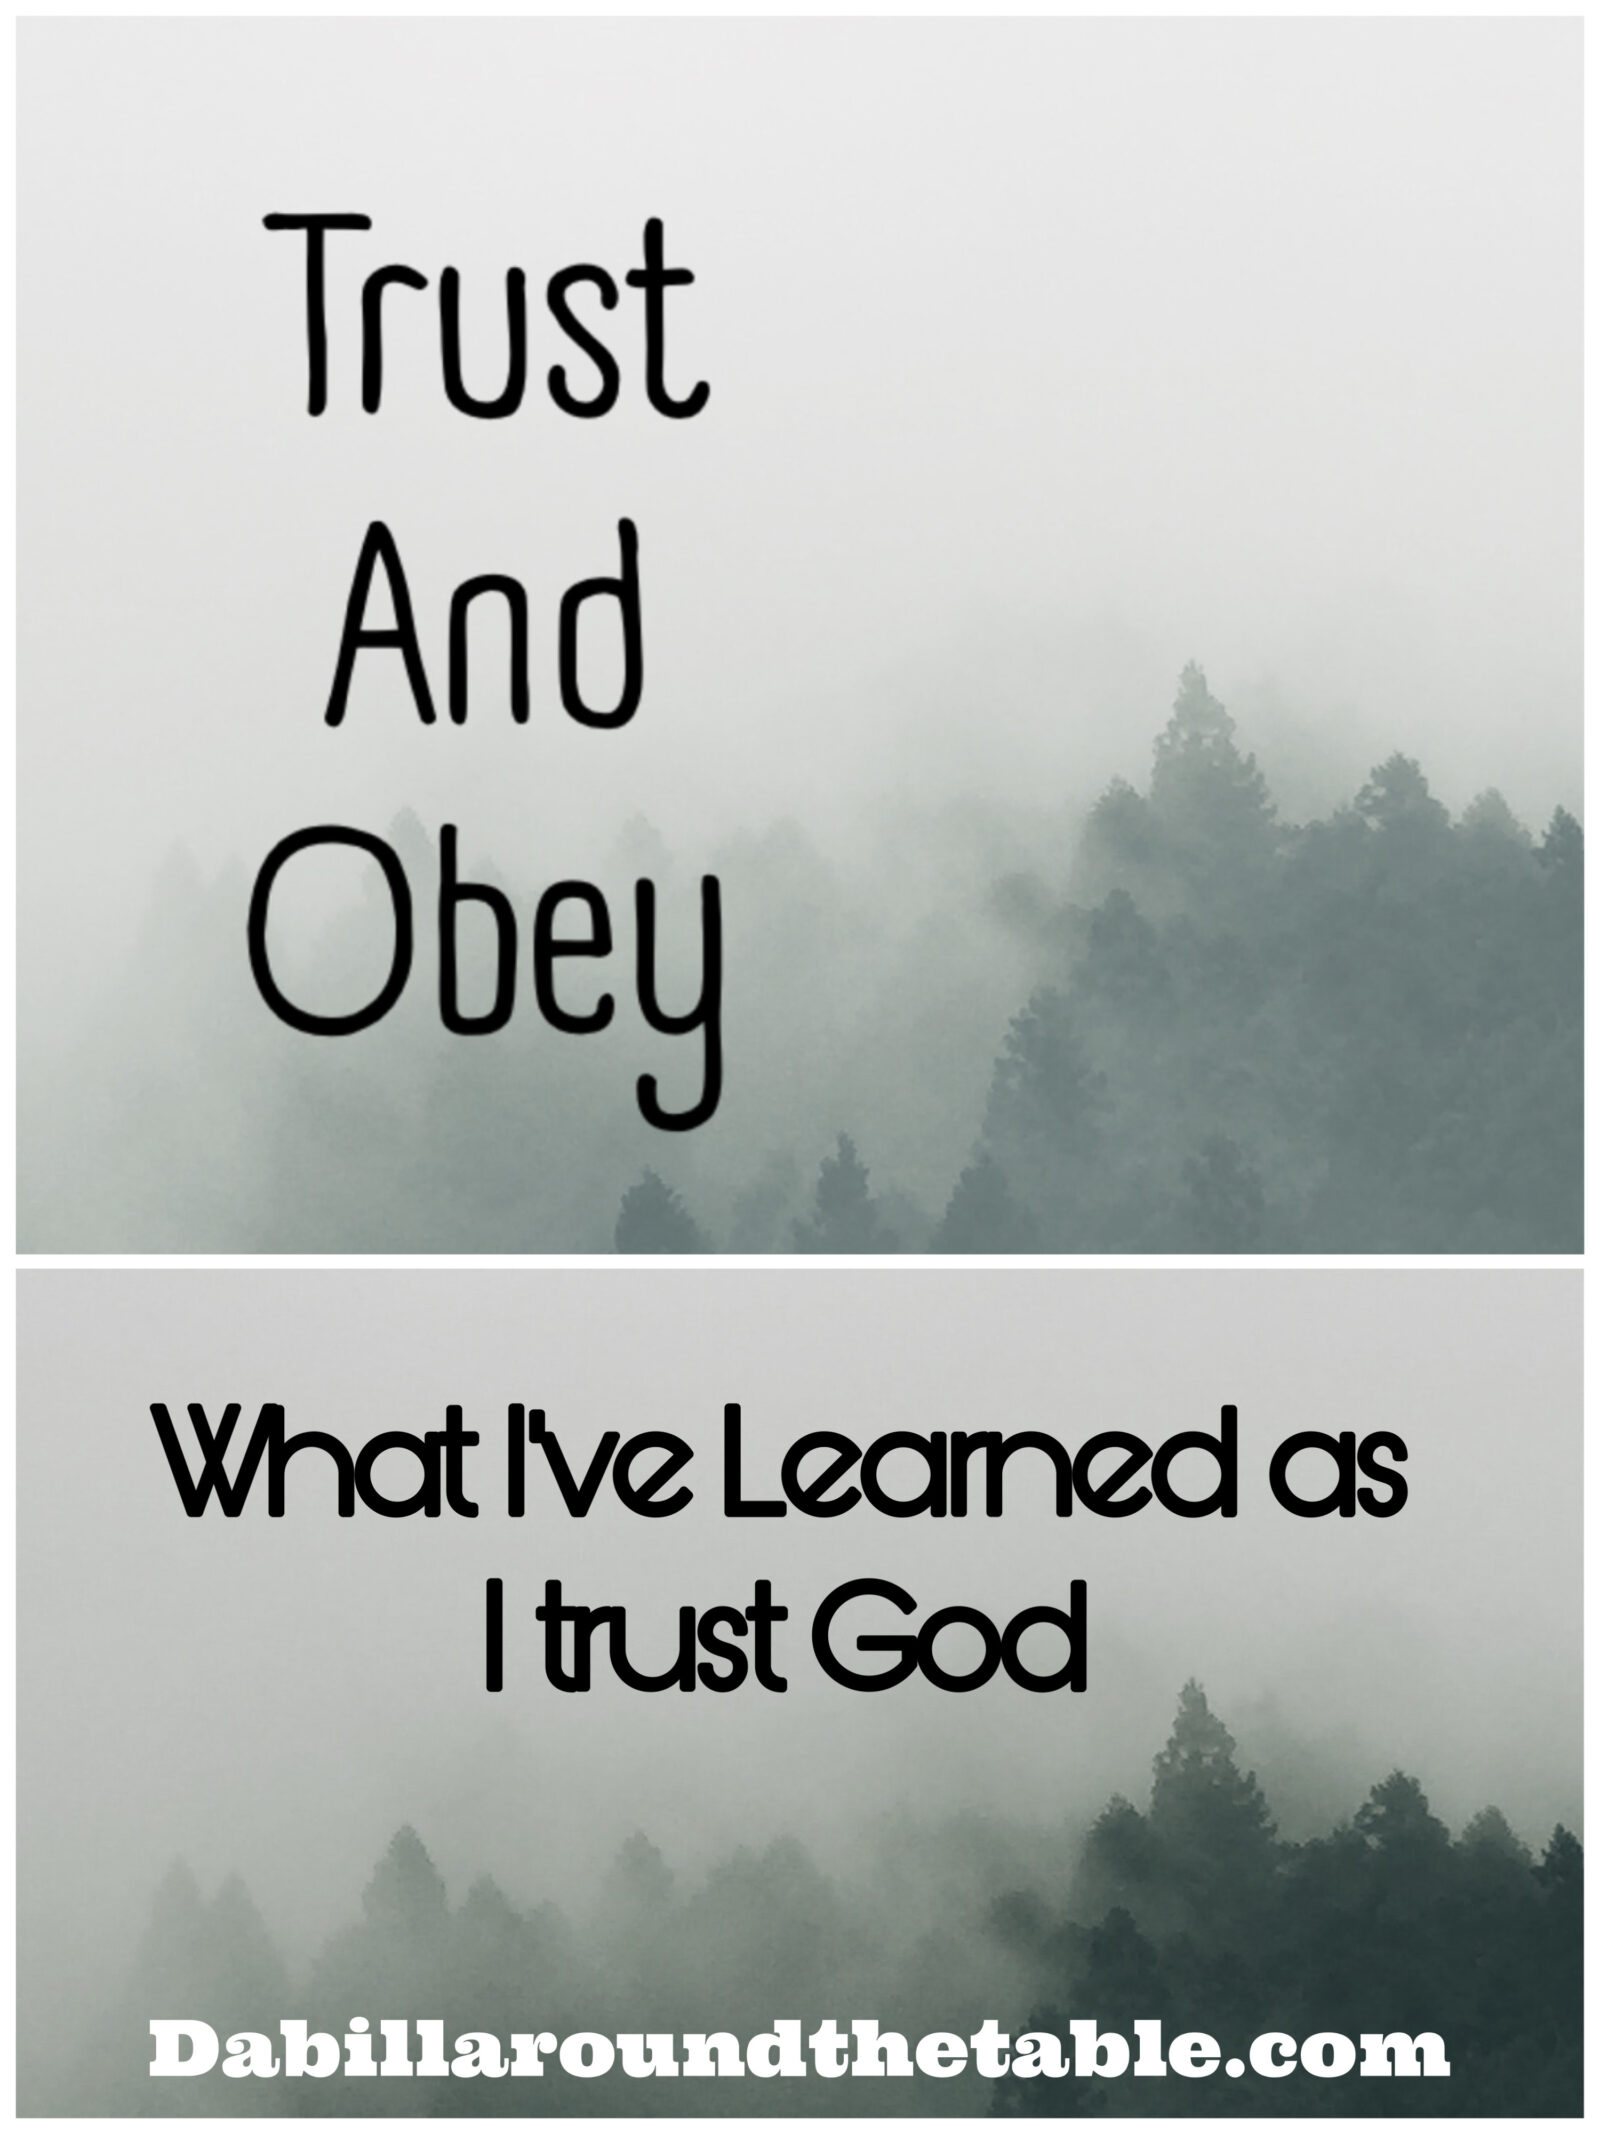 What I've Learned as I Trust God